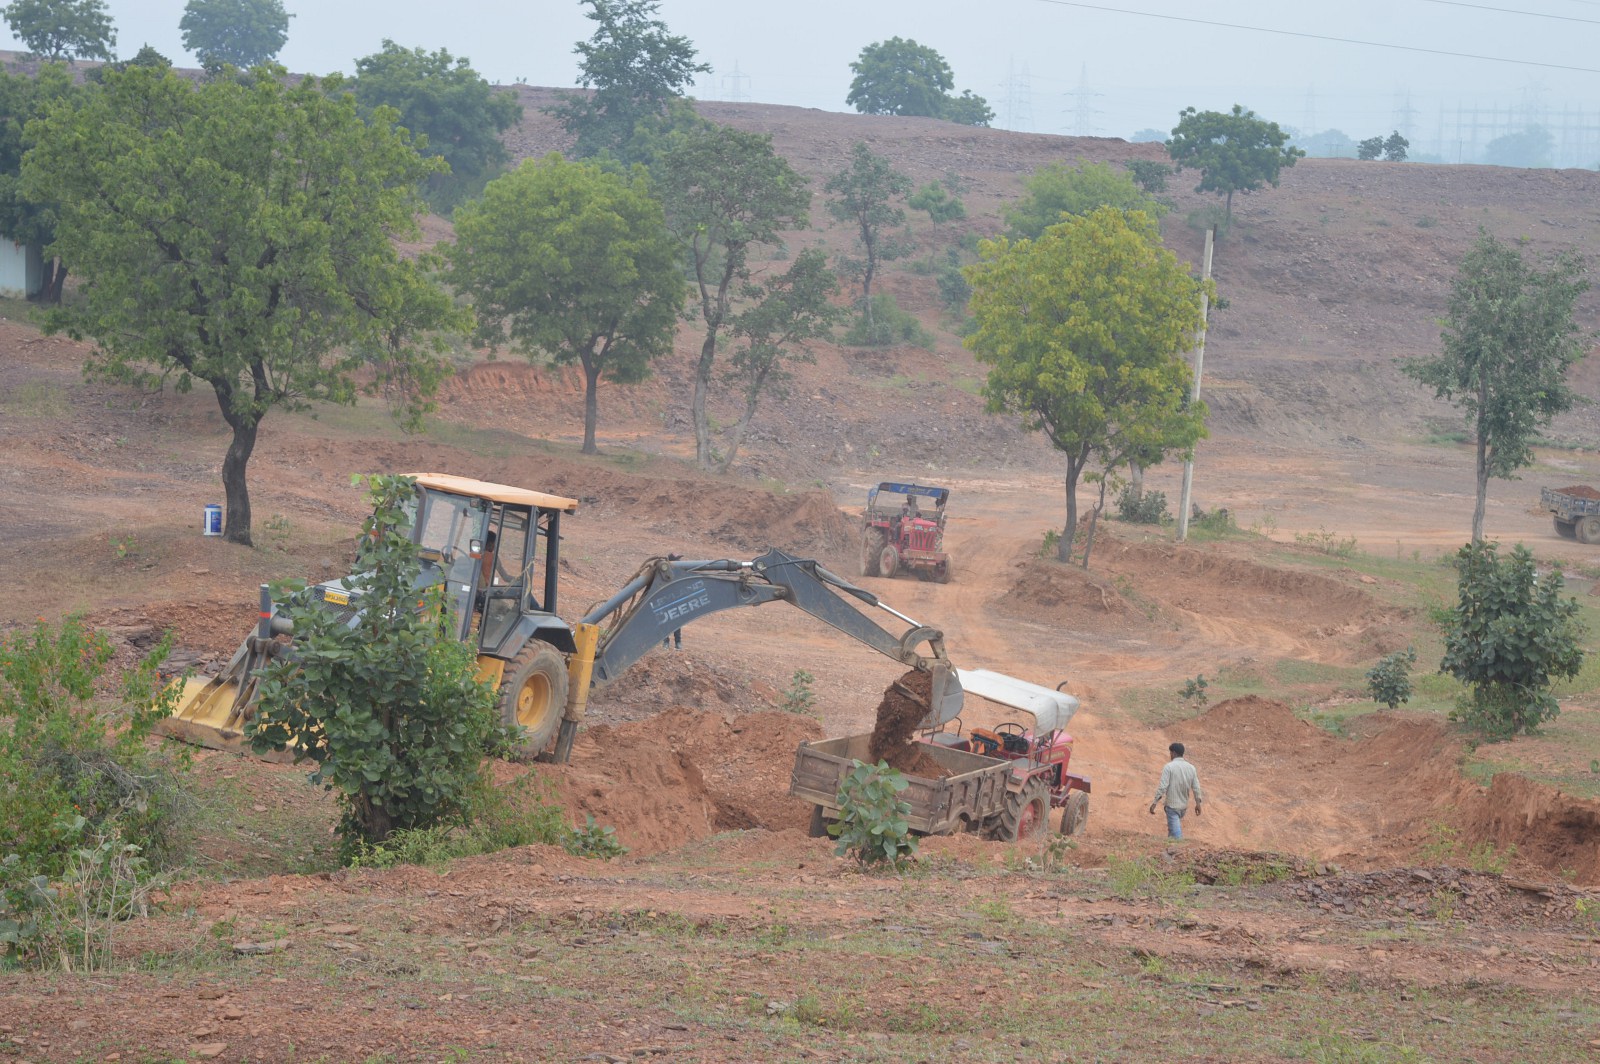 Hills disappearing from illegal excavation, day excavation in broad da